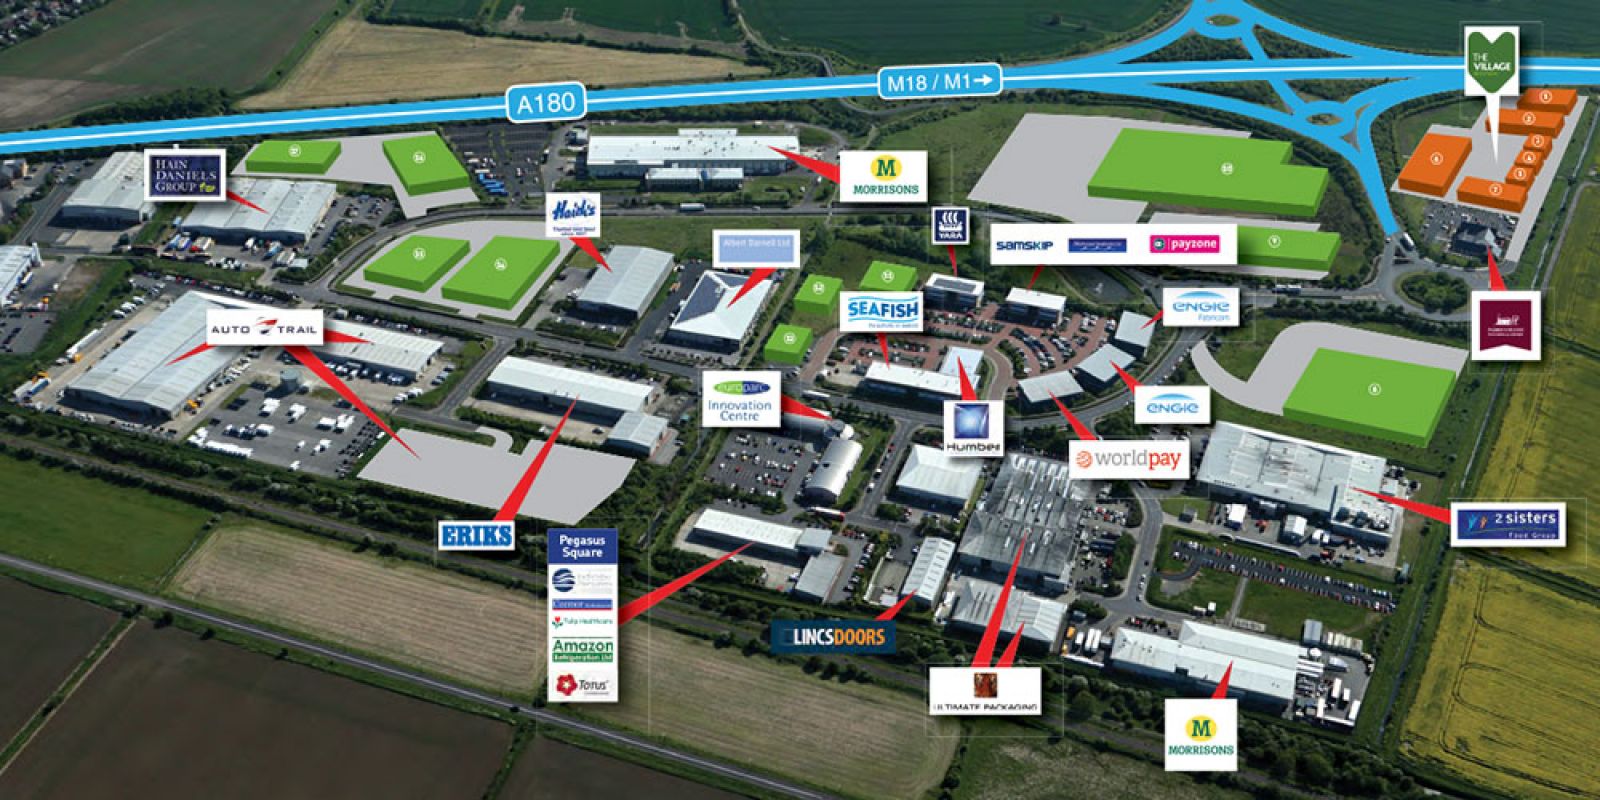 Europarc site map